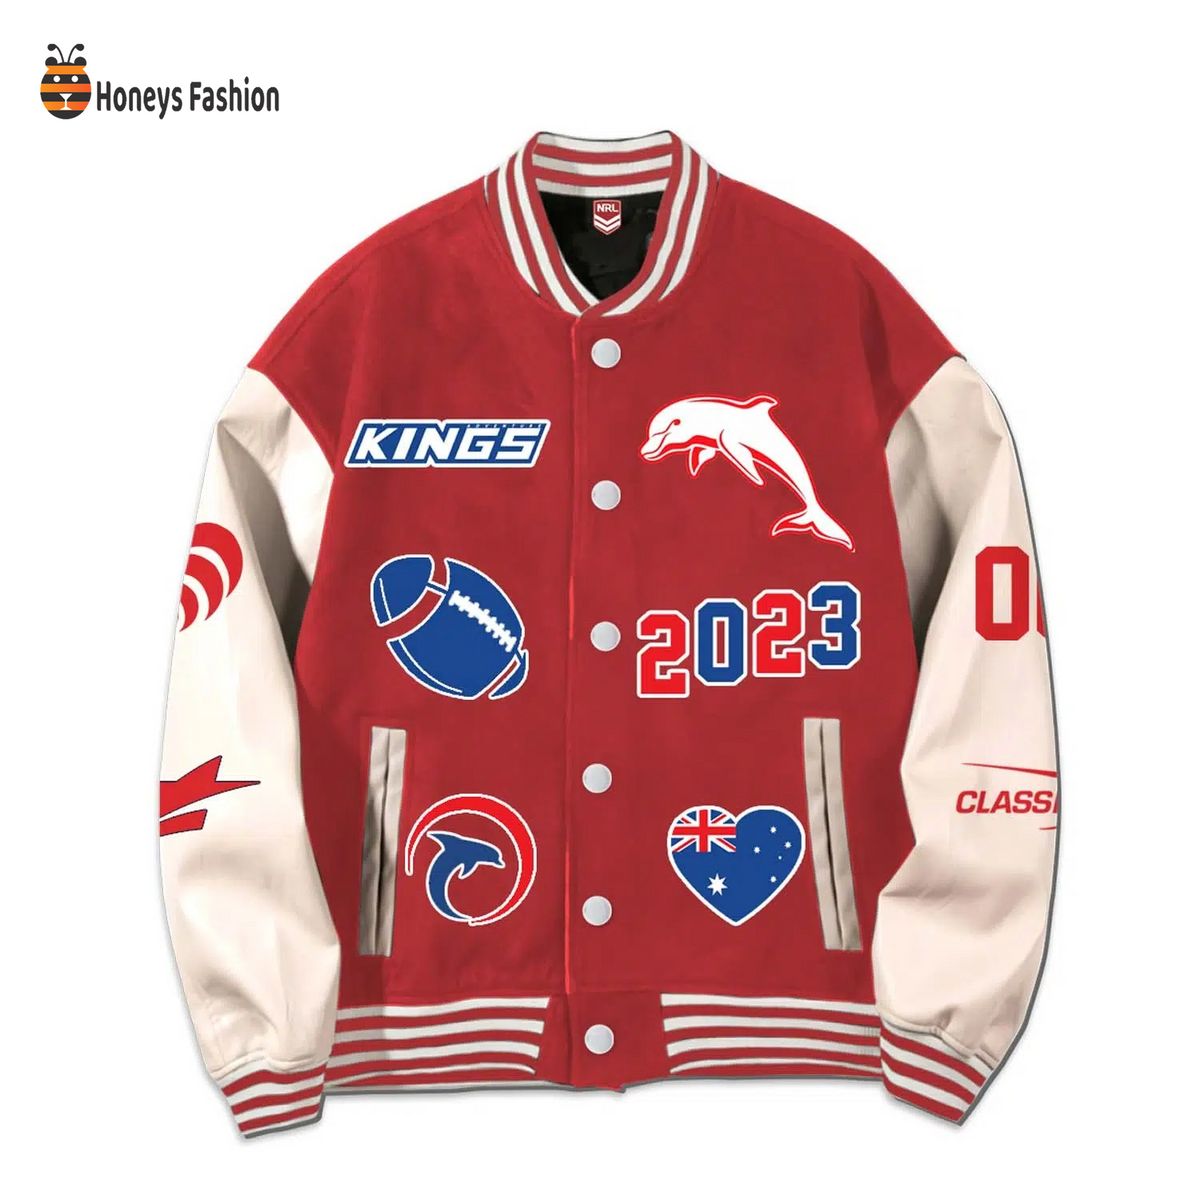 The Dolphins Rugby Personalized Jacket